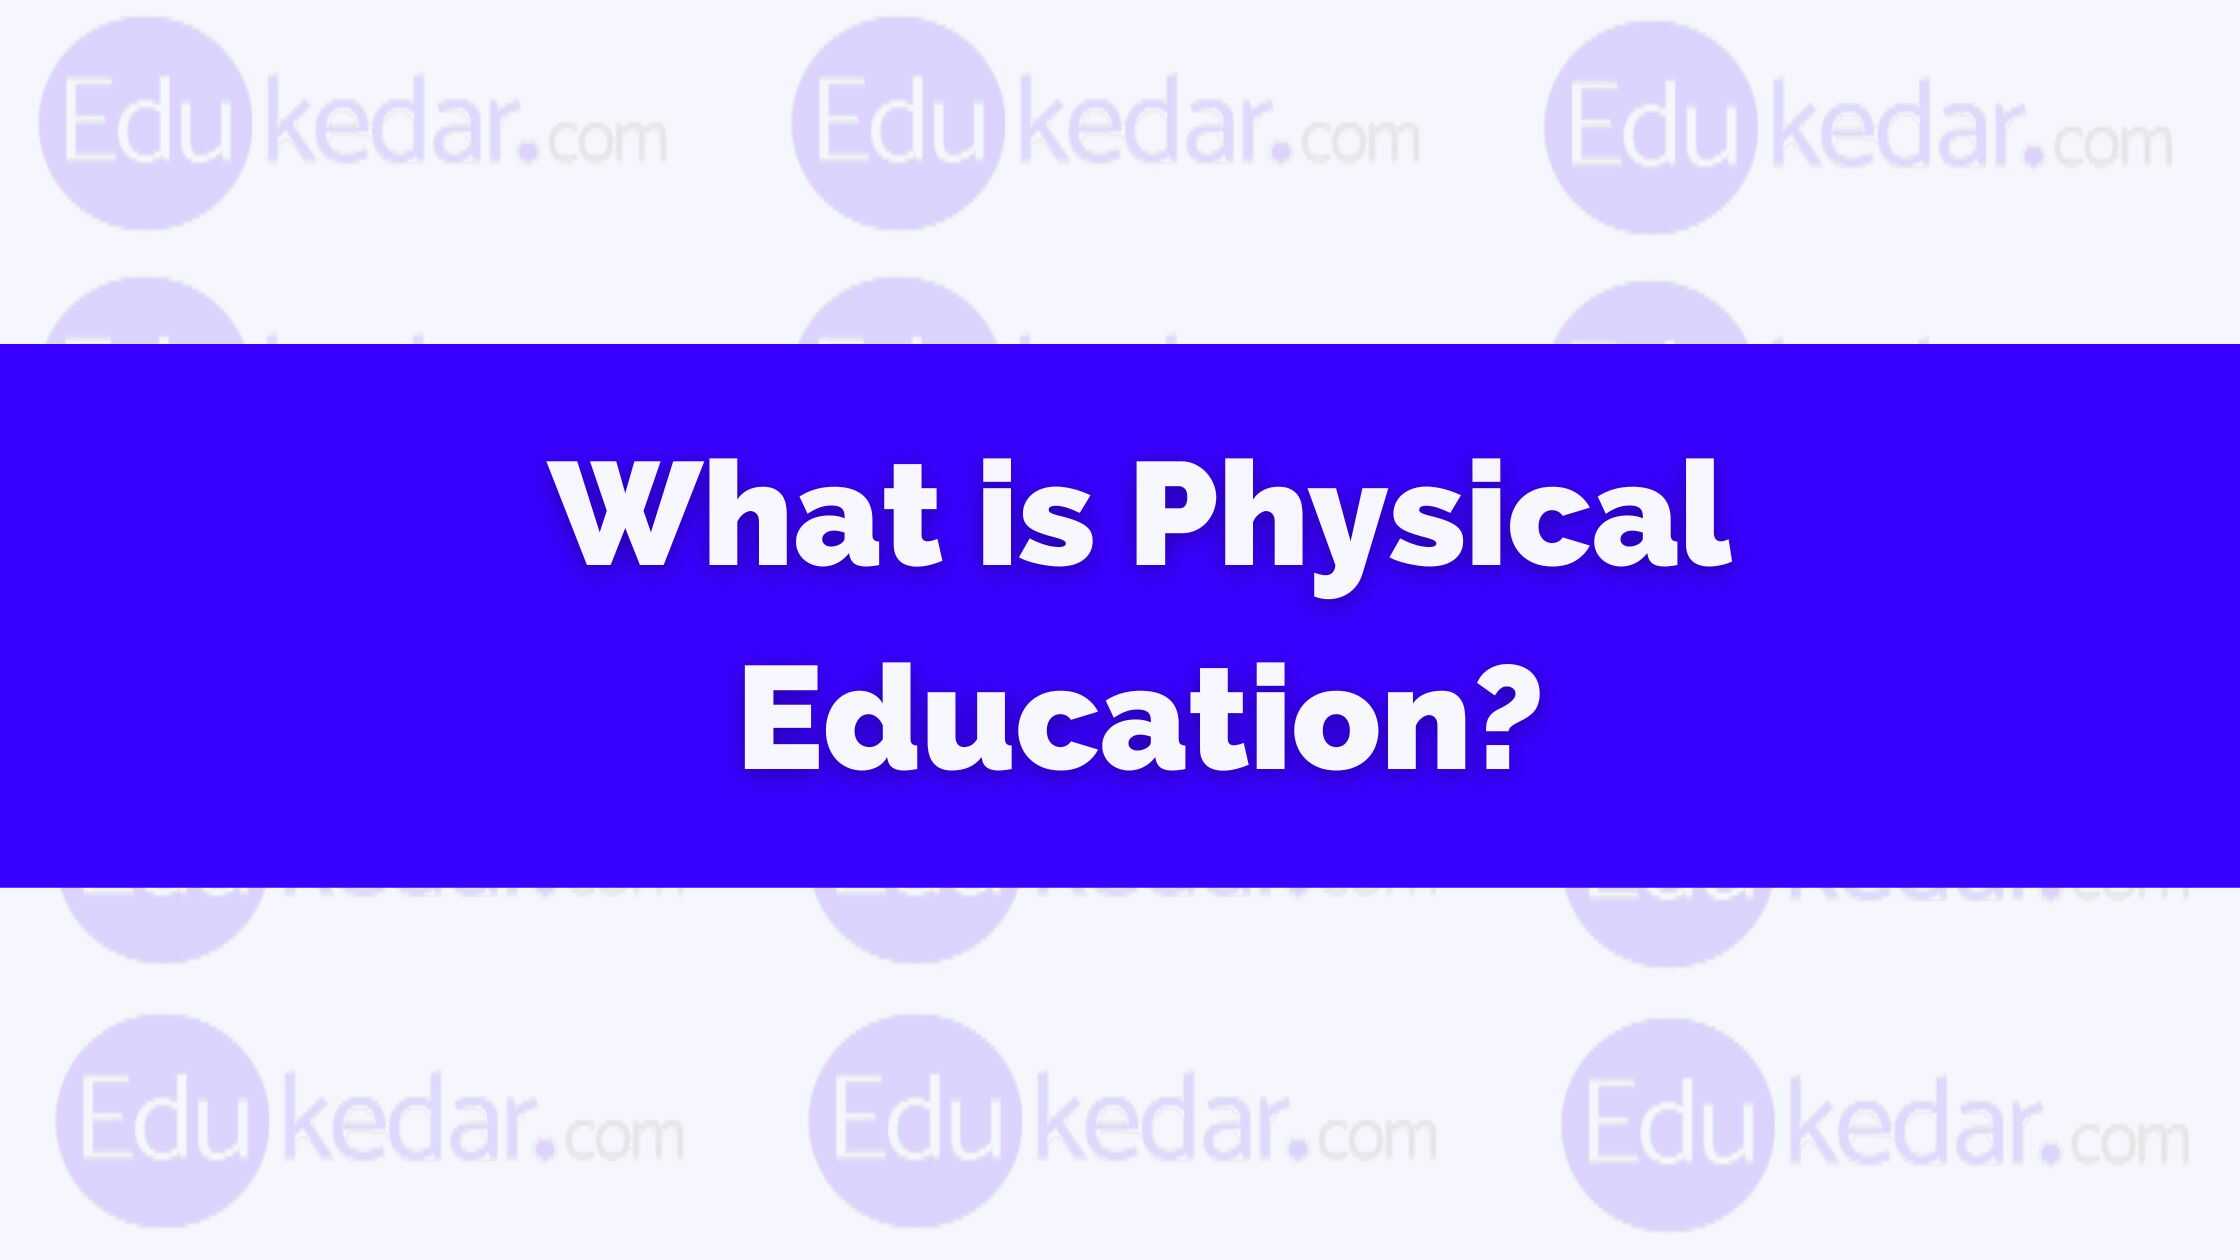 define health education in physical education